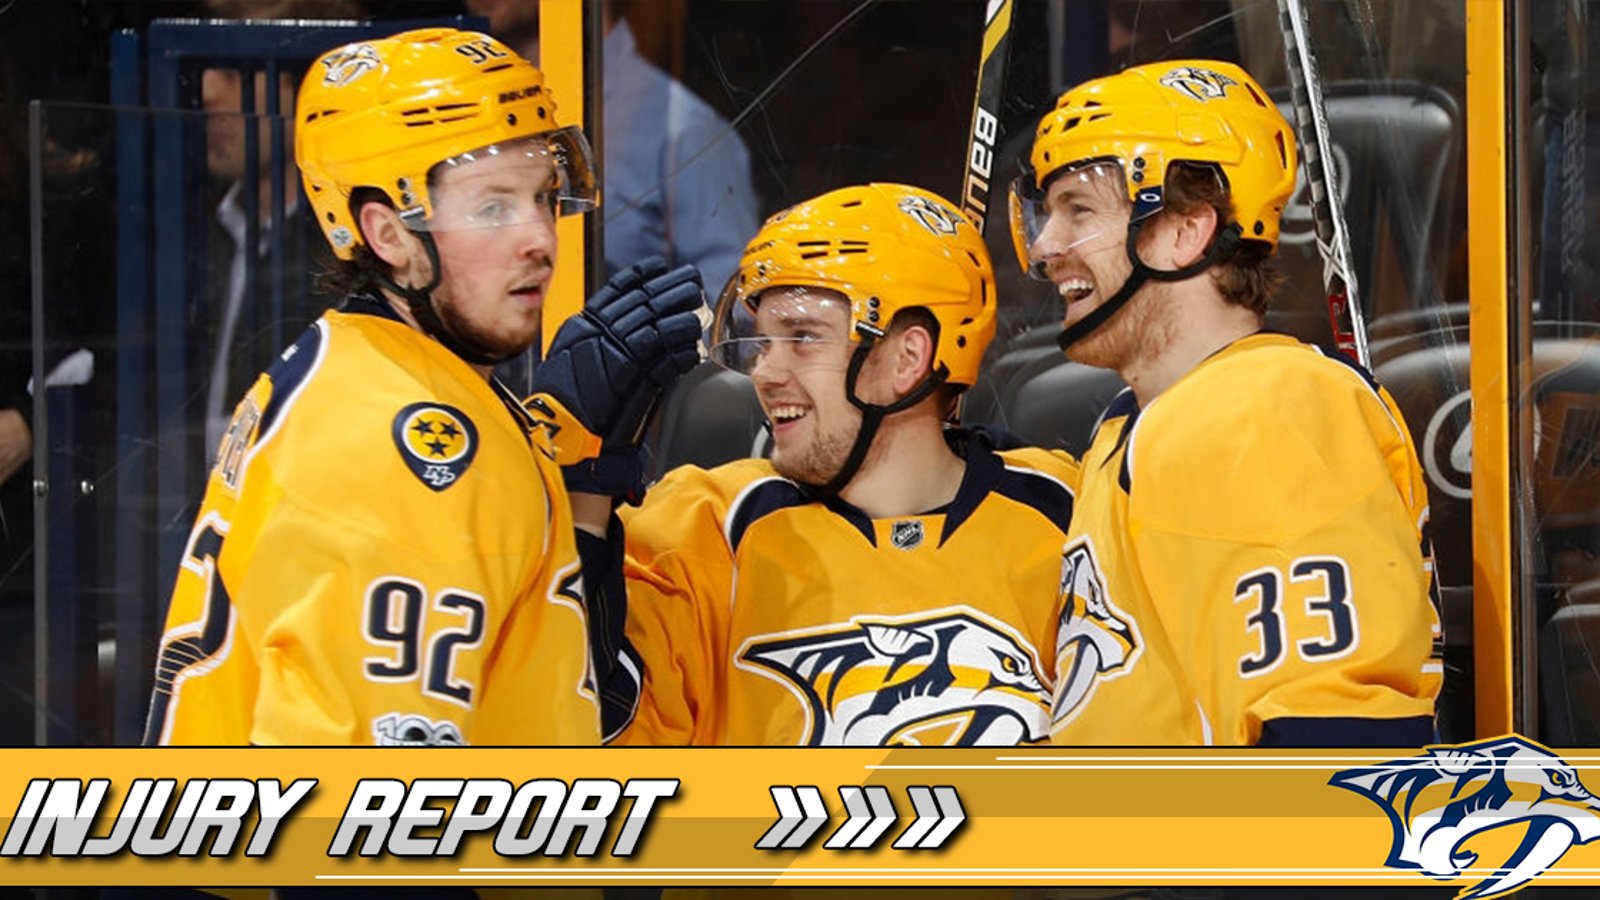 Injury Report: Key player ready to return for Preds